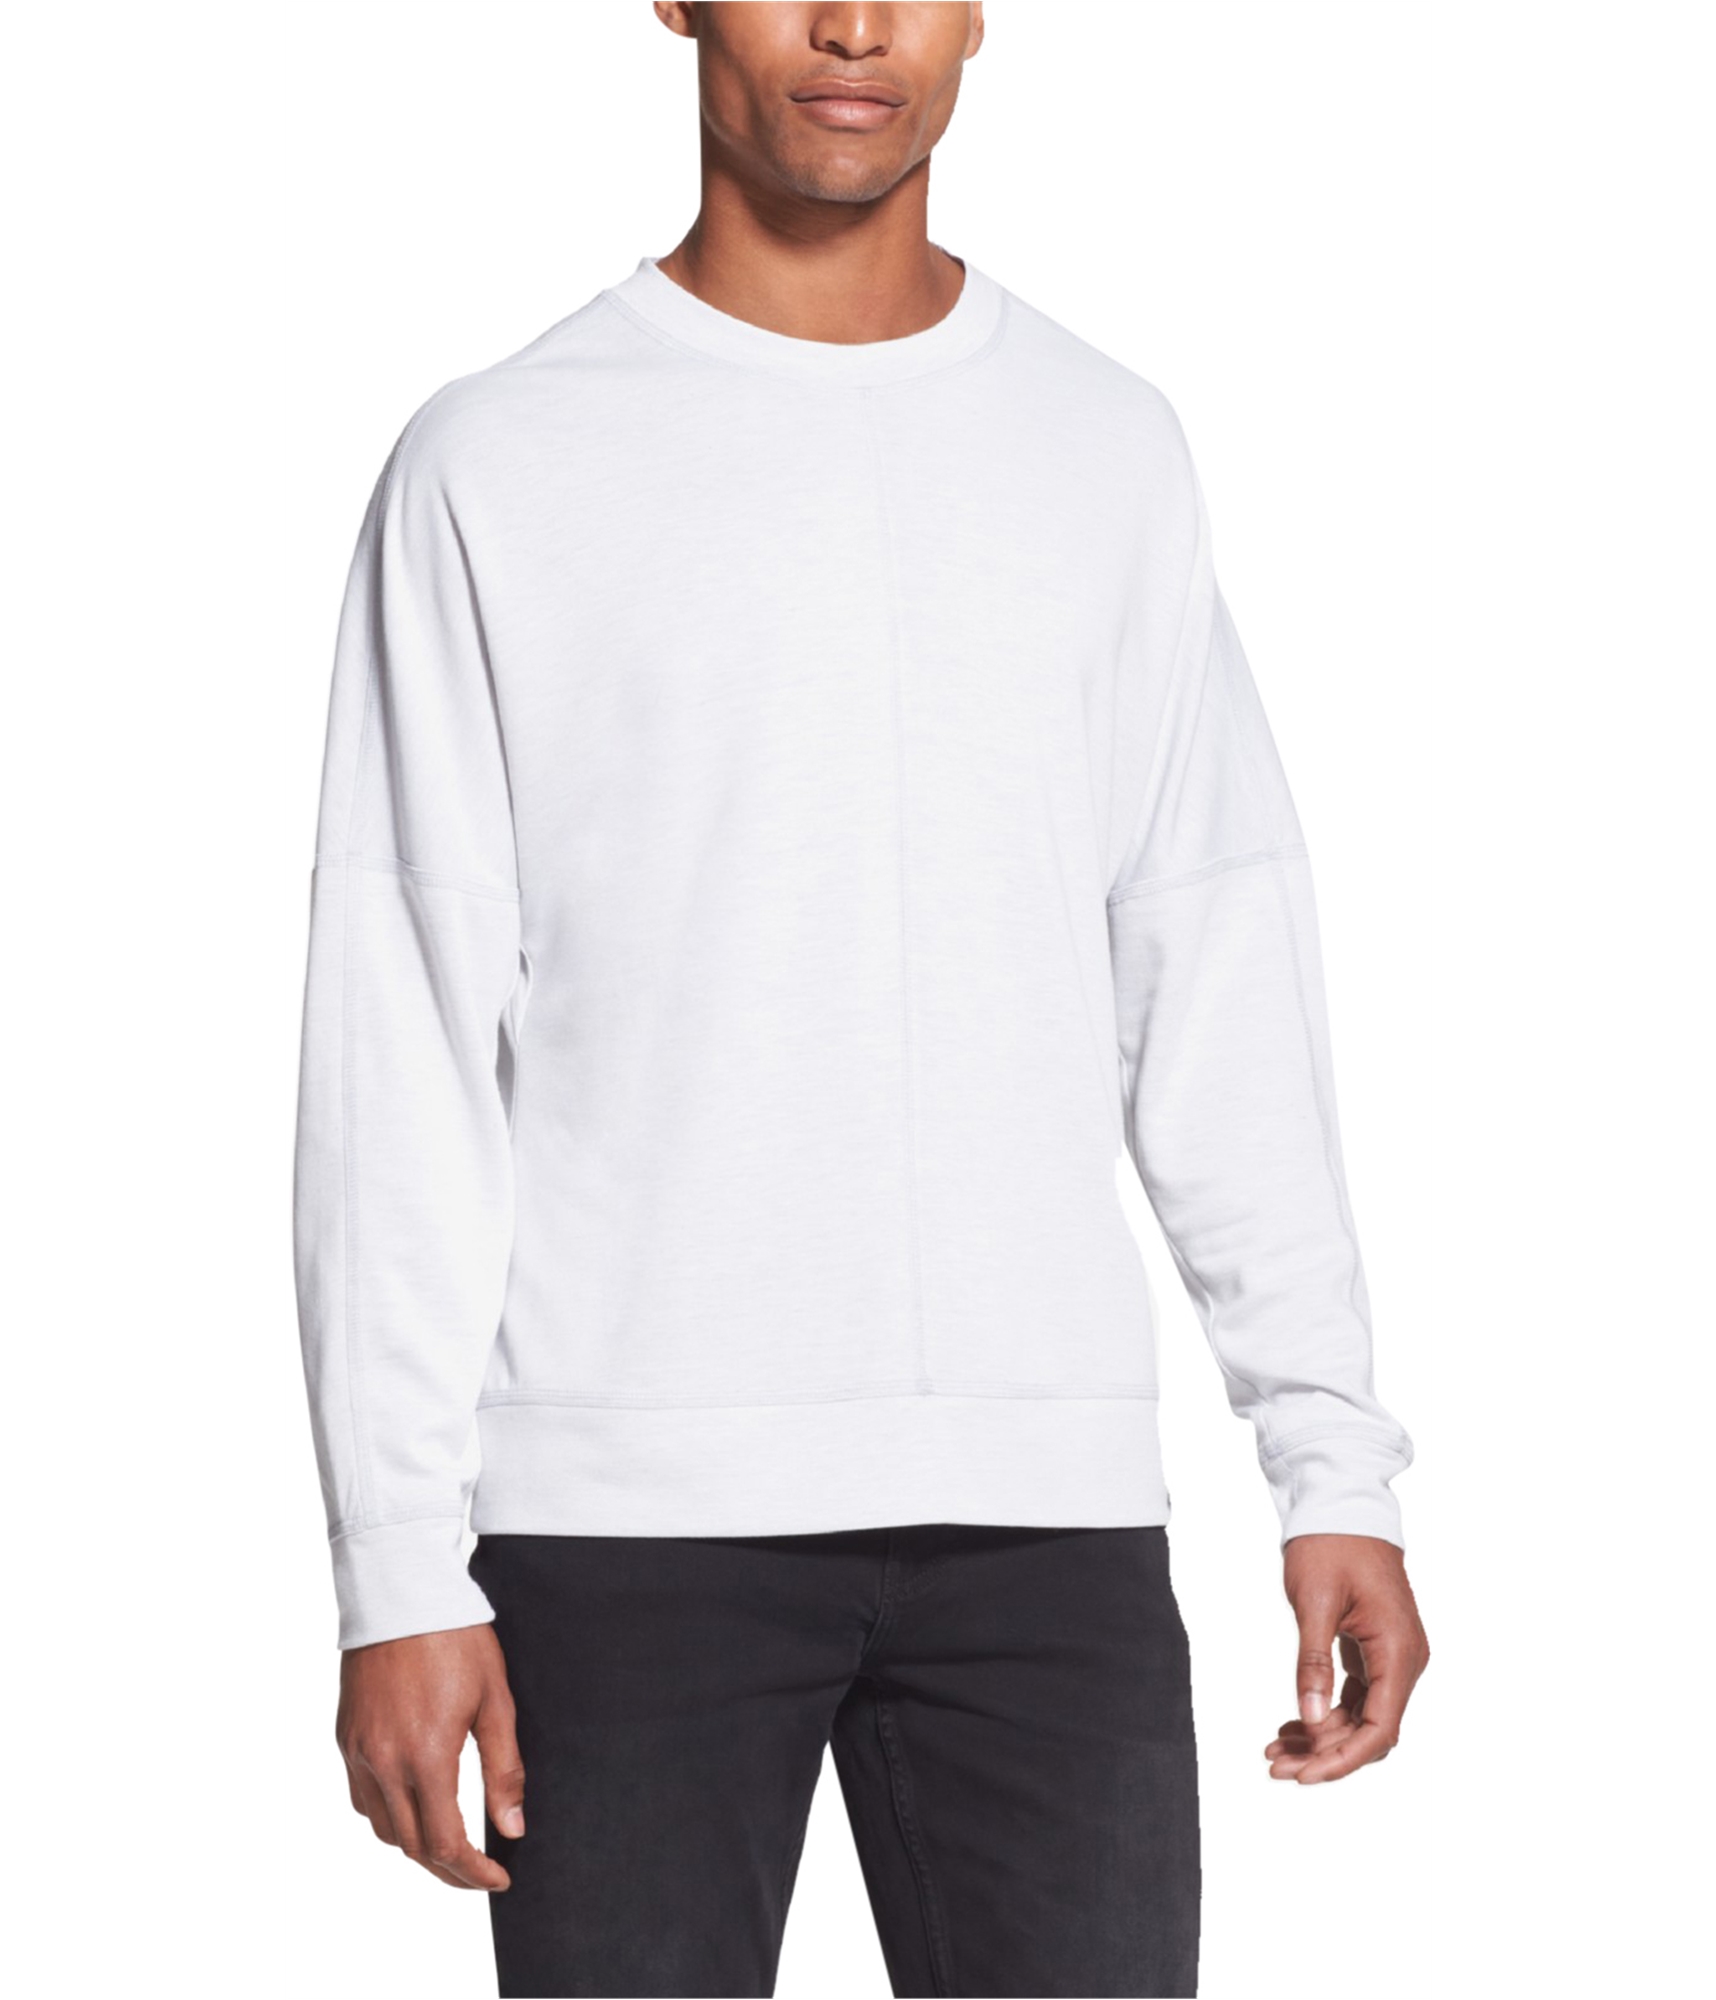 DKNY Mens Solid Pullover Sweater, White, Large 741065037531 | eBay